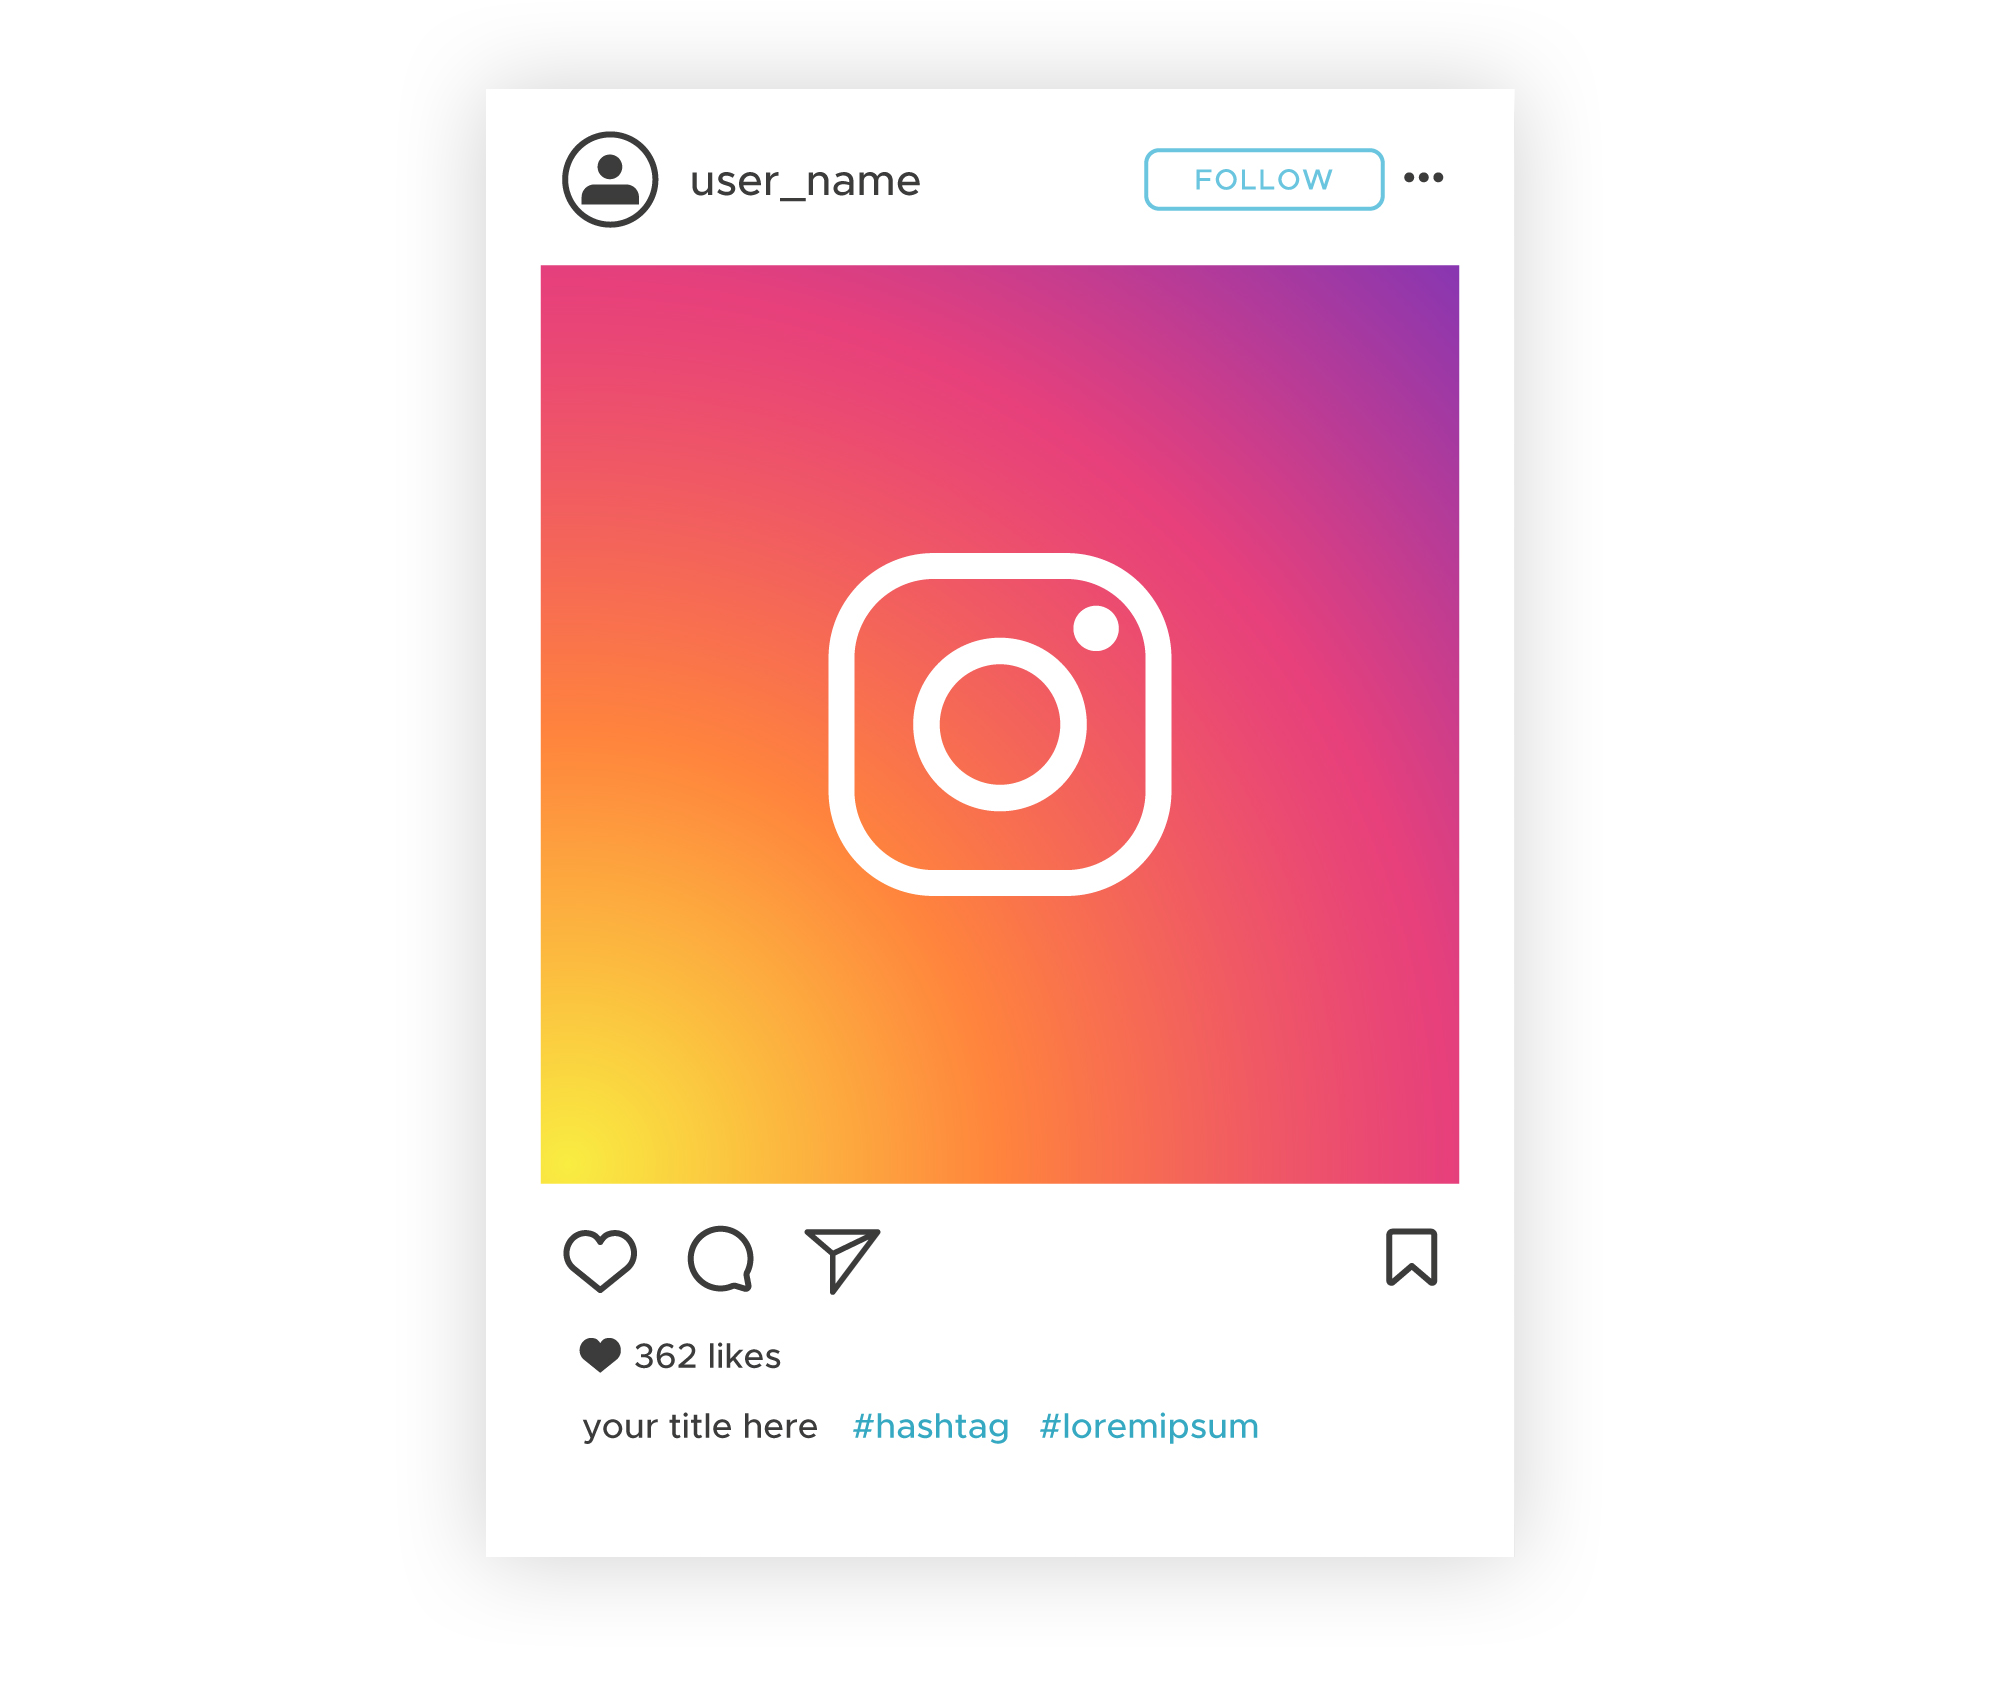 Instagram Marketers: Challenges Brands Are Facing, According To Research